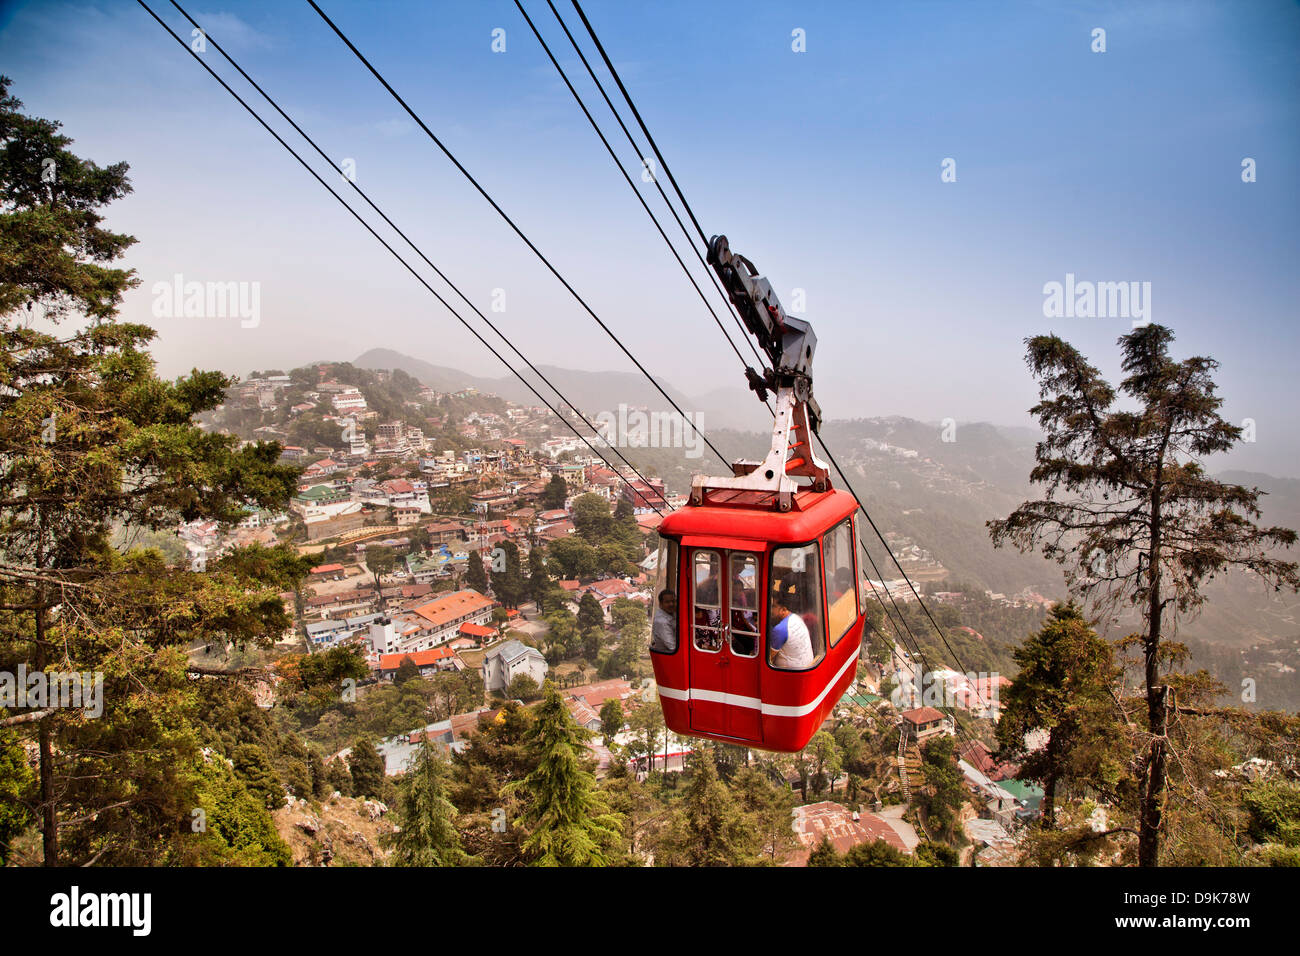 Overhead Cable Car in motion, Gun Hill, Mussoorie, Uttarakhand, India Stock Photo